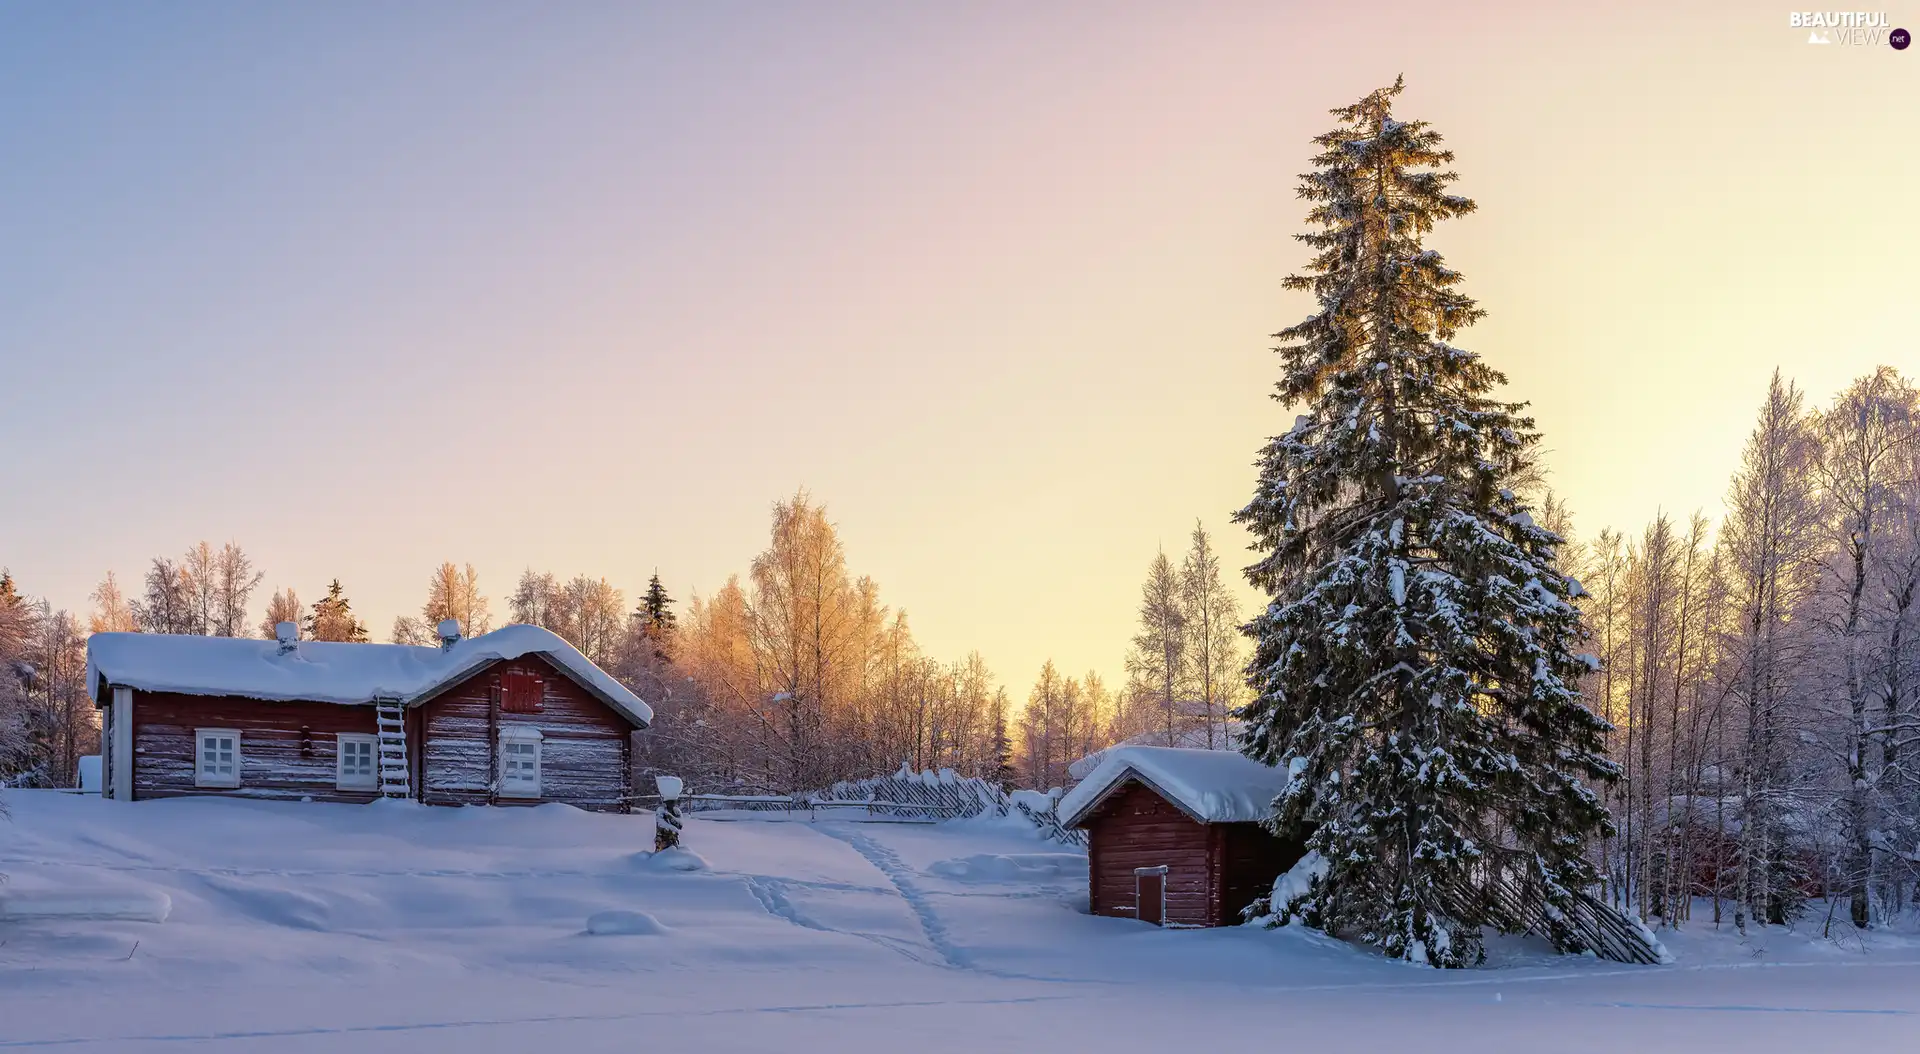 trees, Snowy, Great Sunsets, winter, viewes, Houses